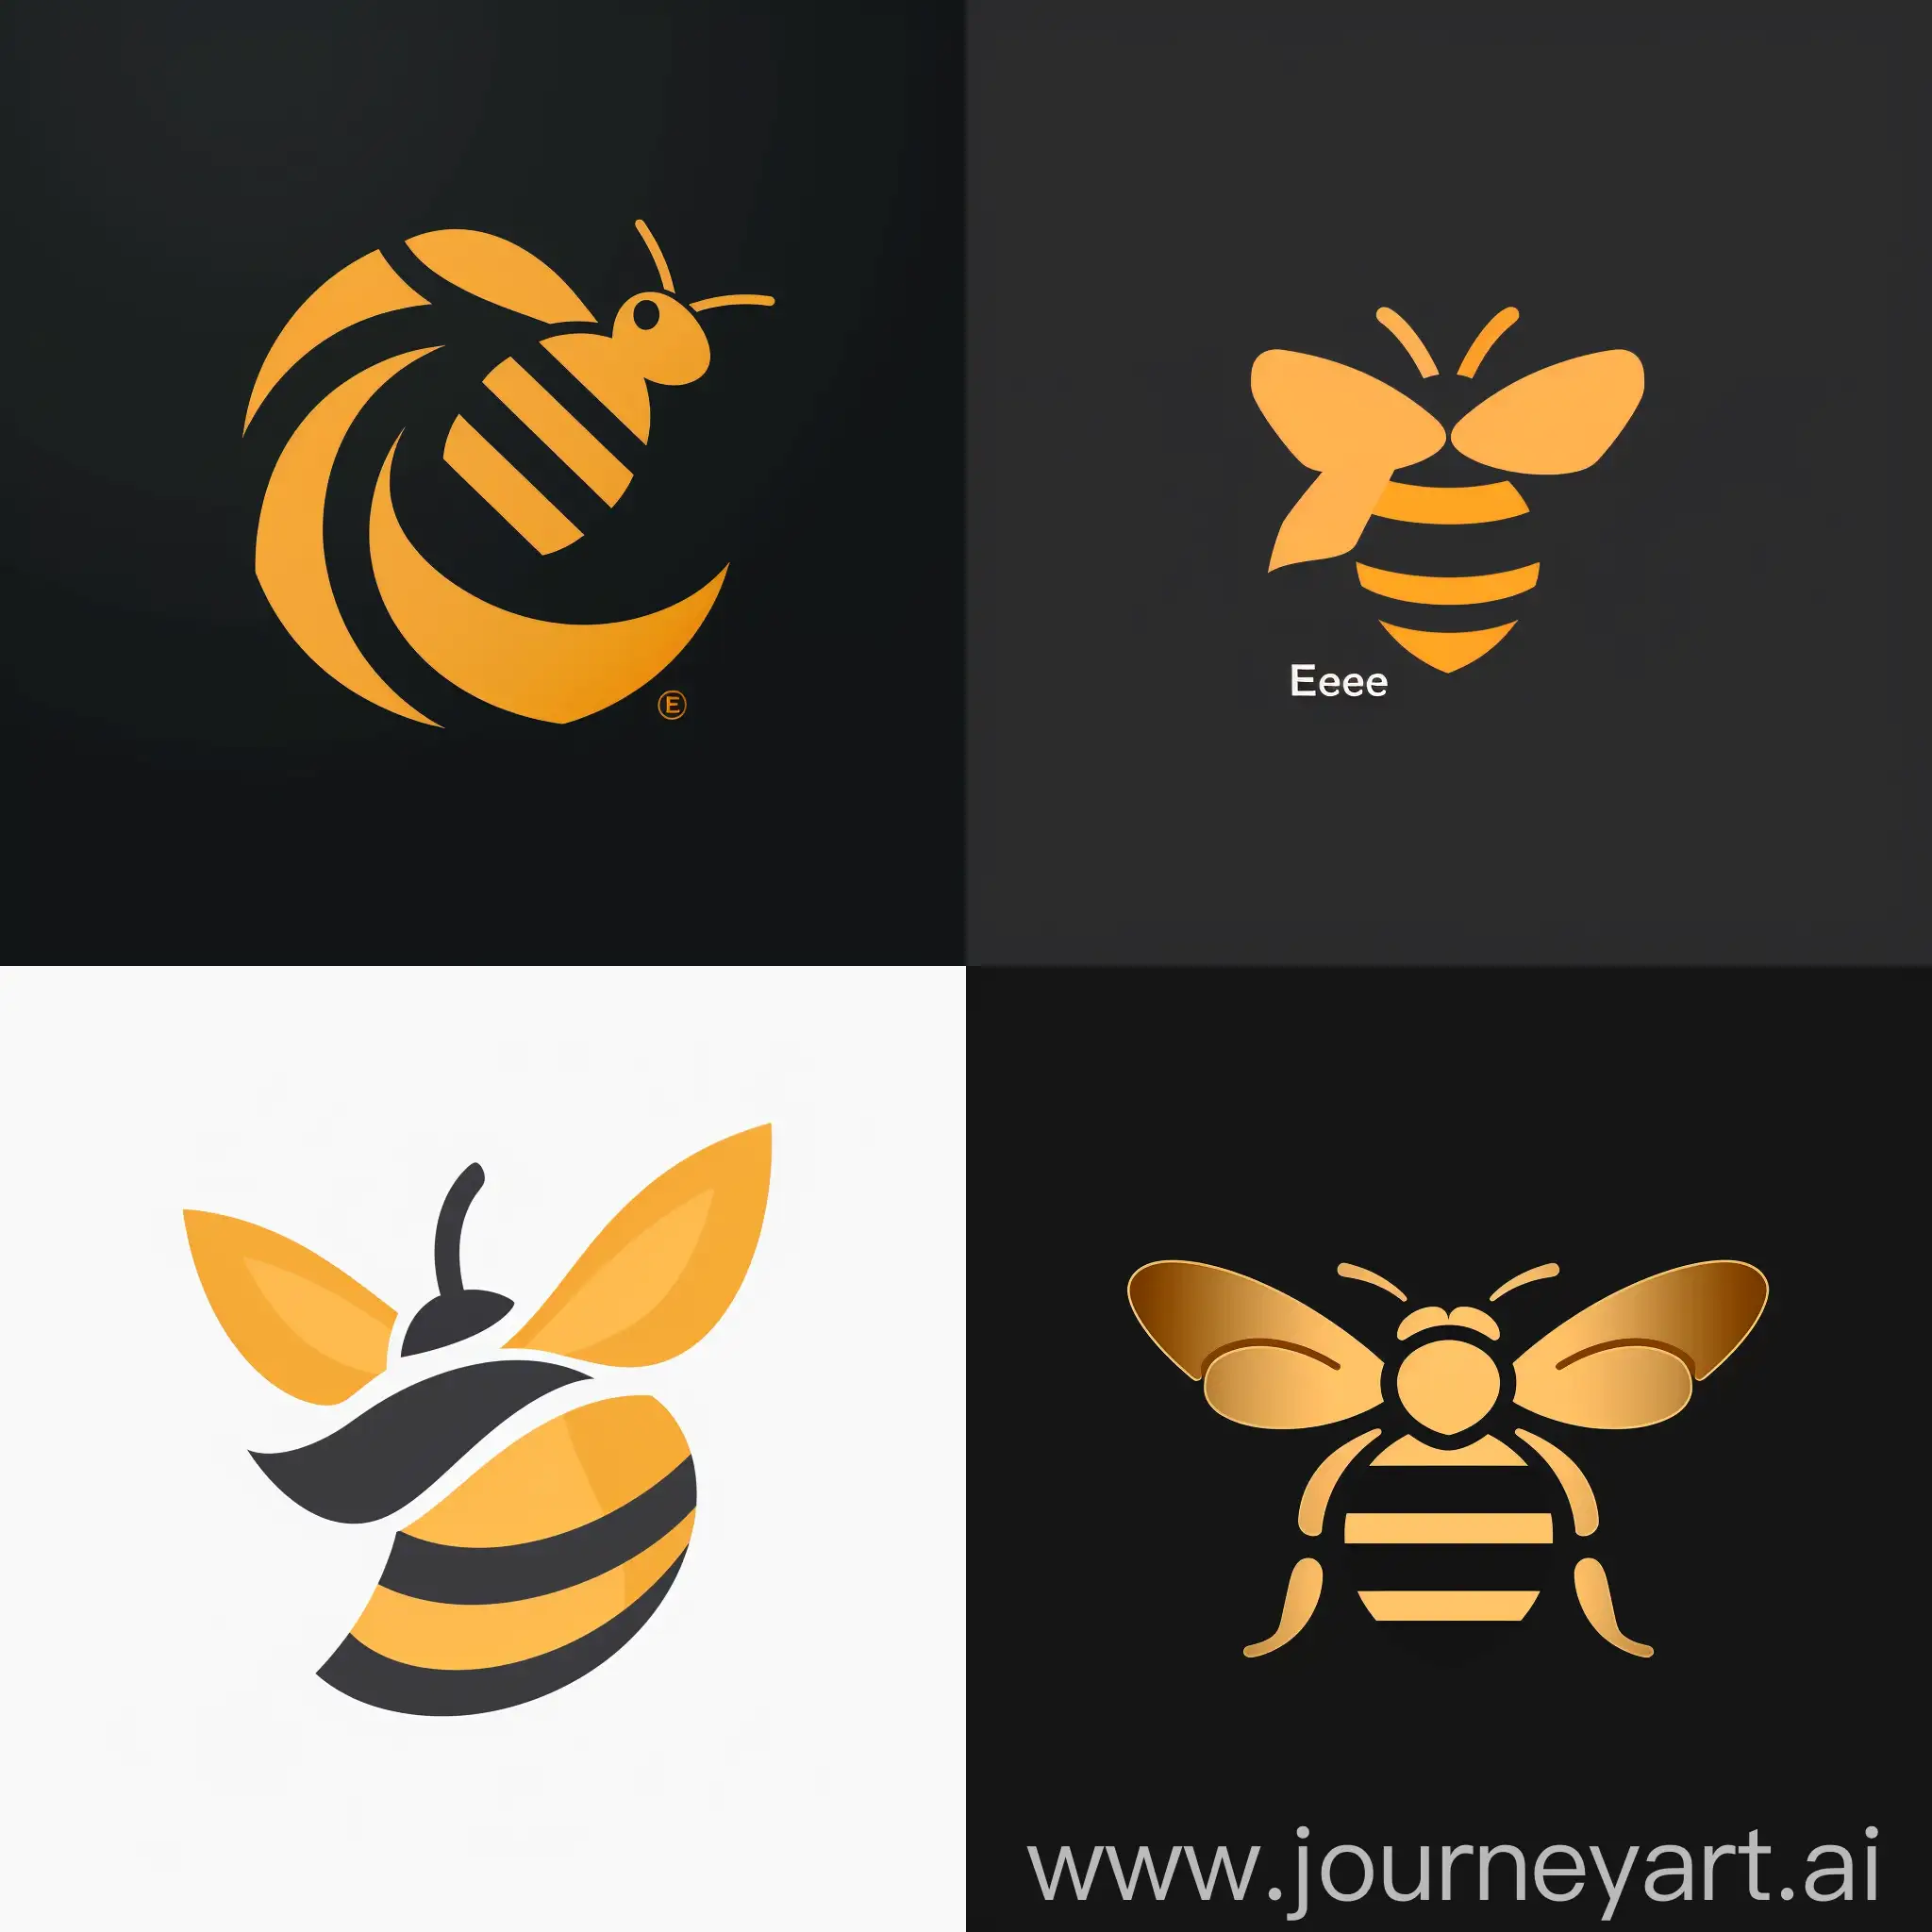 make me a logo exactly with exactly same description and colors as of microsoft edge but instead of its icon, use vector of honeybee.